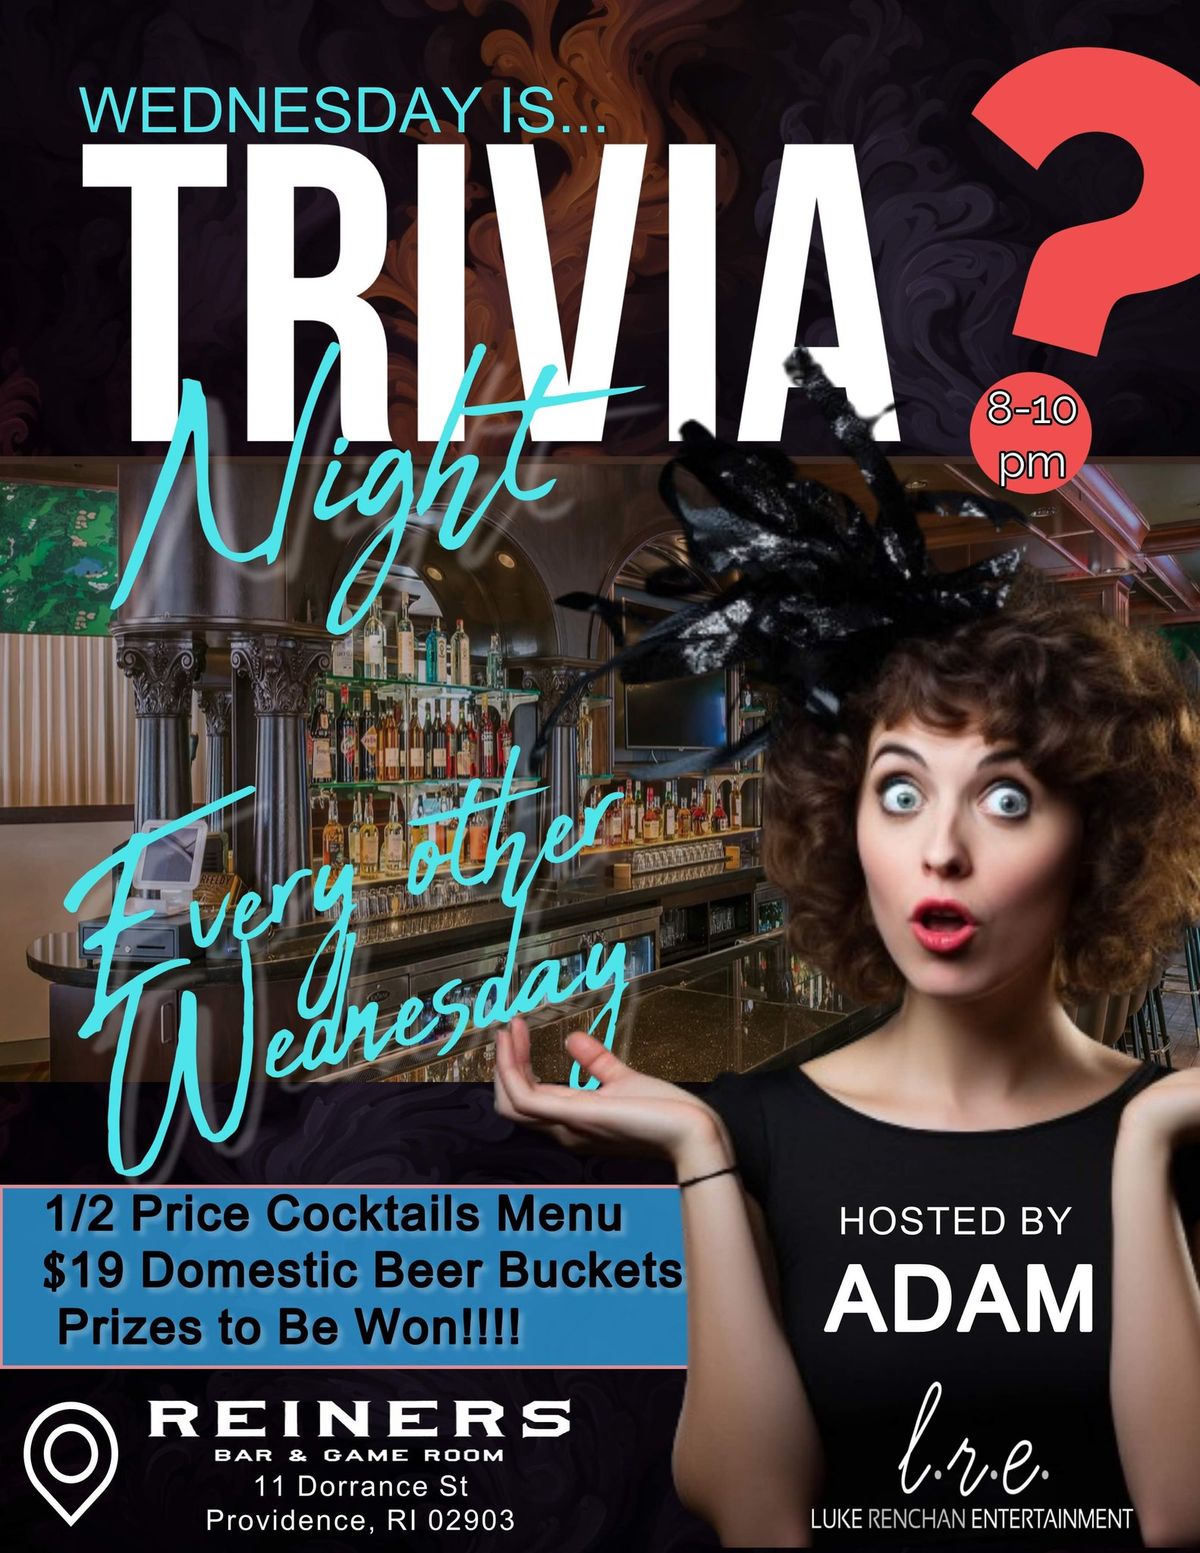 Wednesday Night Trivia at Reiners Bar & Game Room